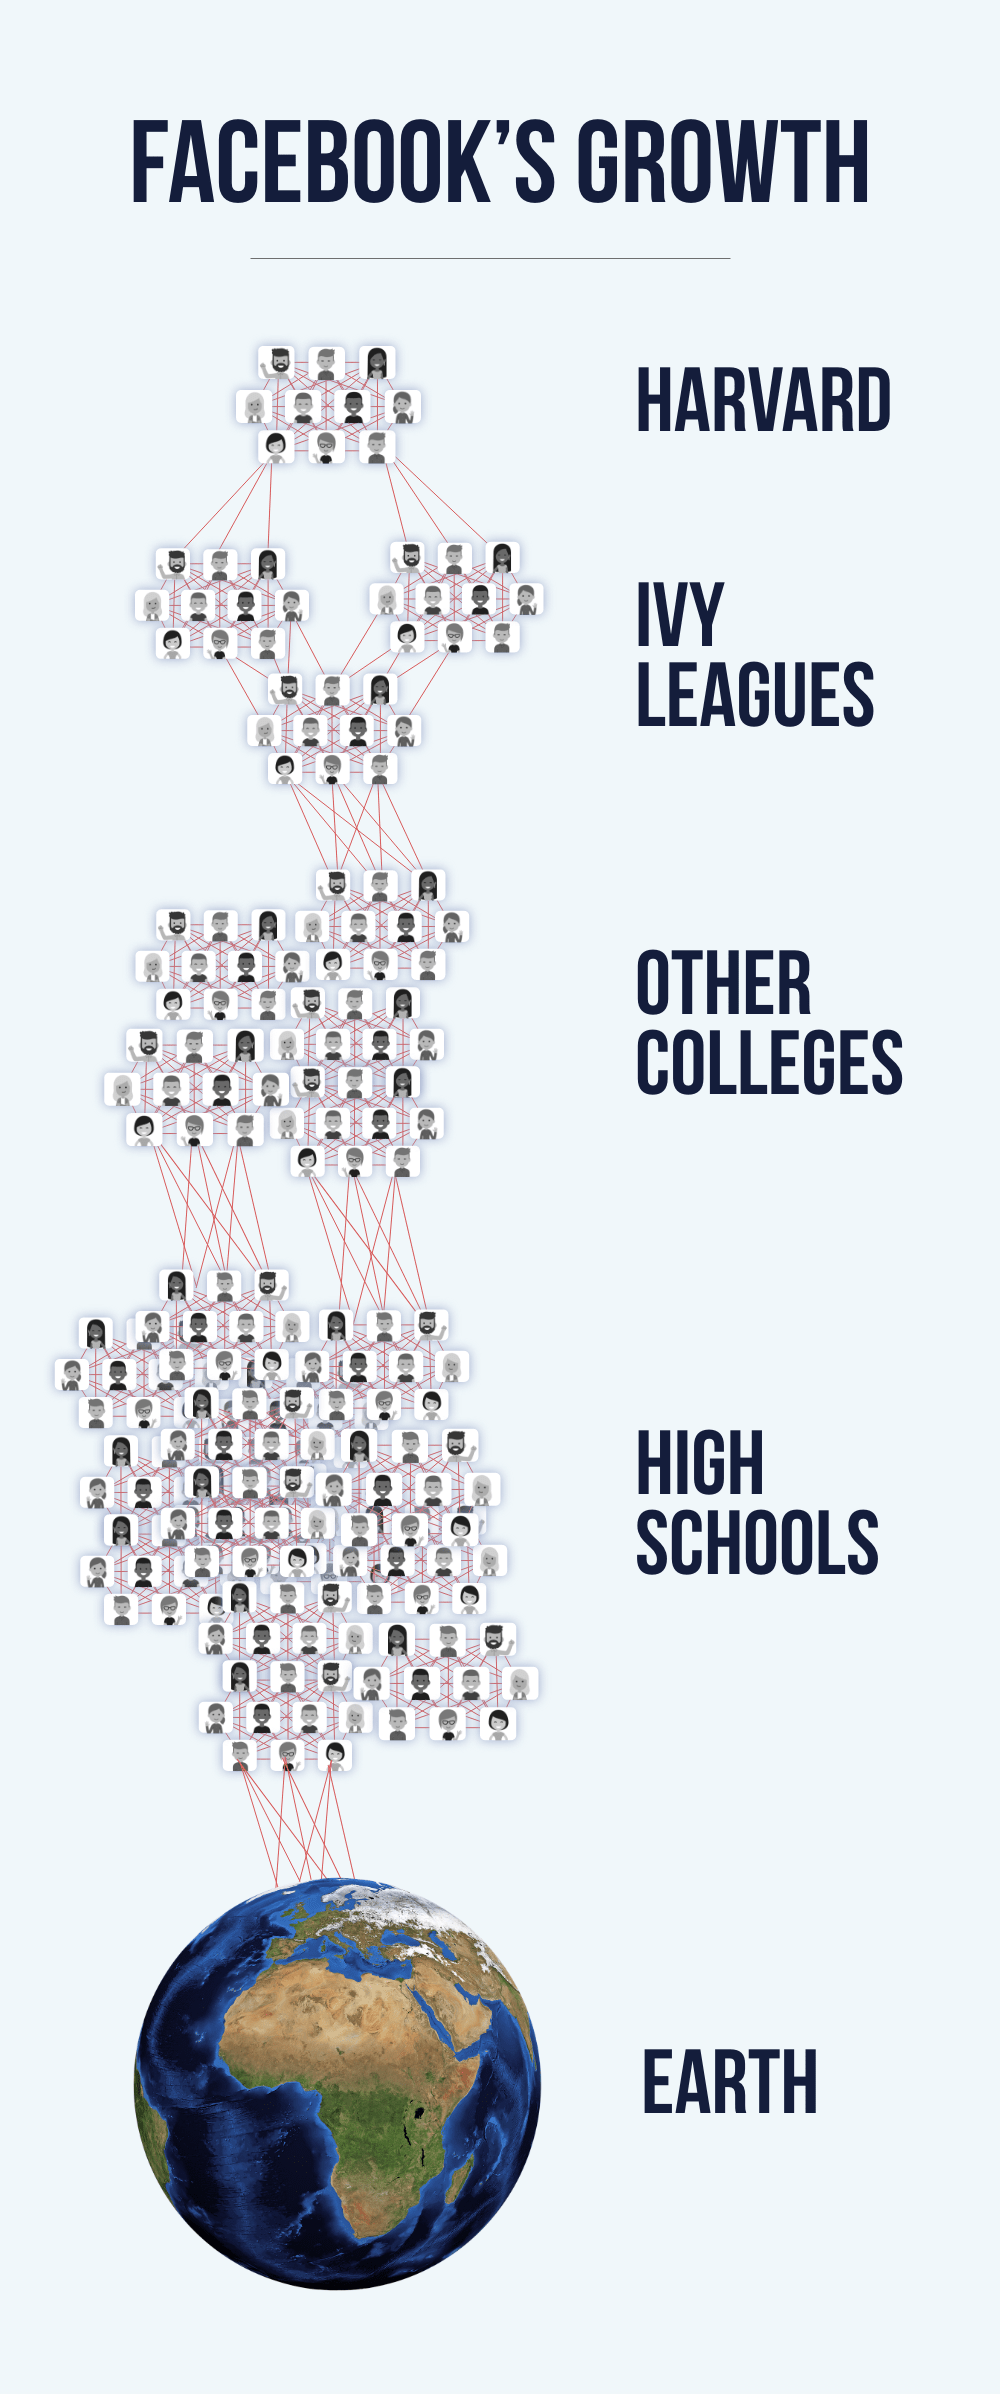 Facebook growth starting with small network of Harvard students progressing to Ivy Leagues because of overlapping connections, followed by other colleges, followed by high schools, followed by the rest of the world